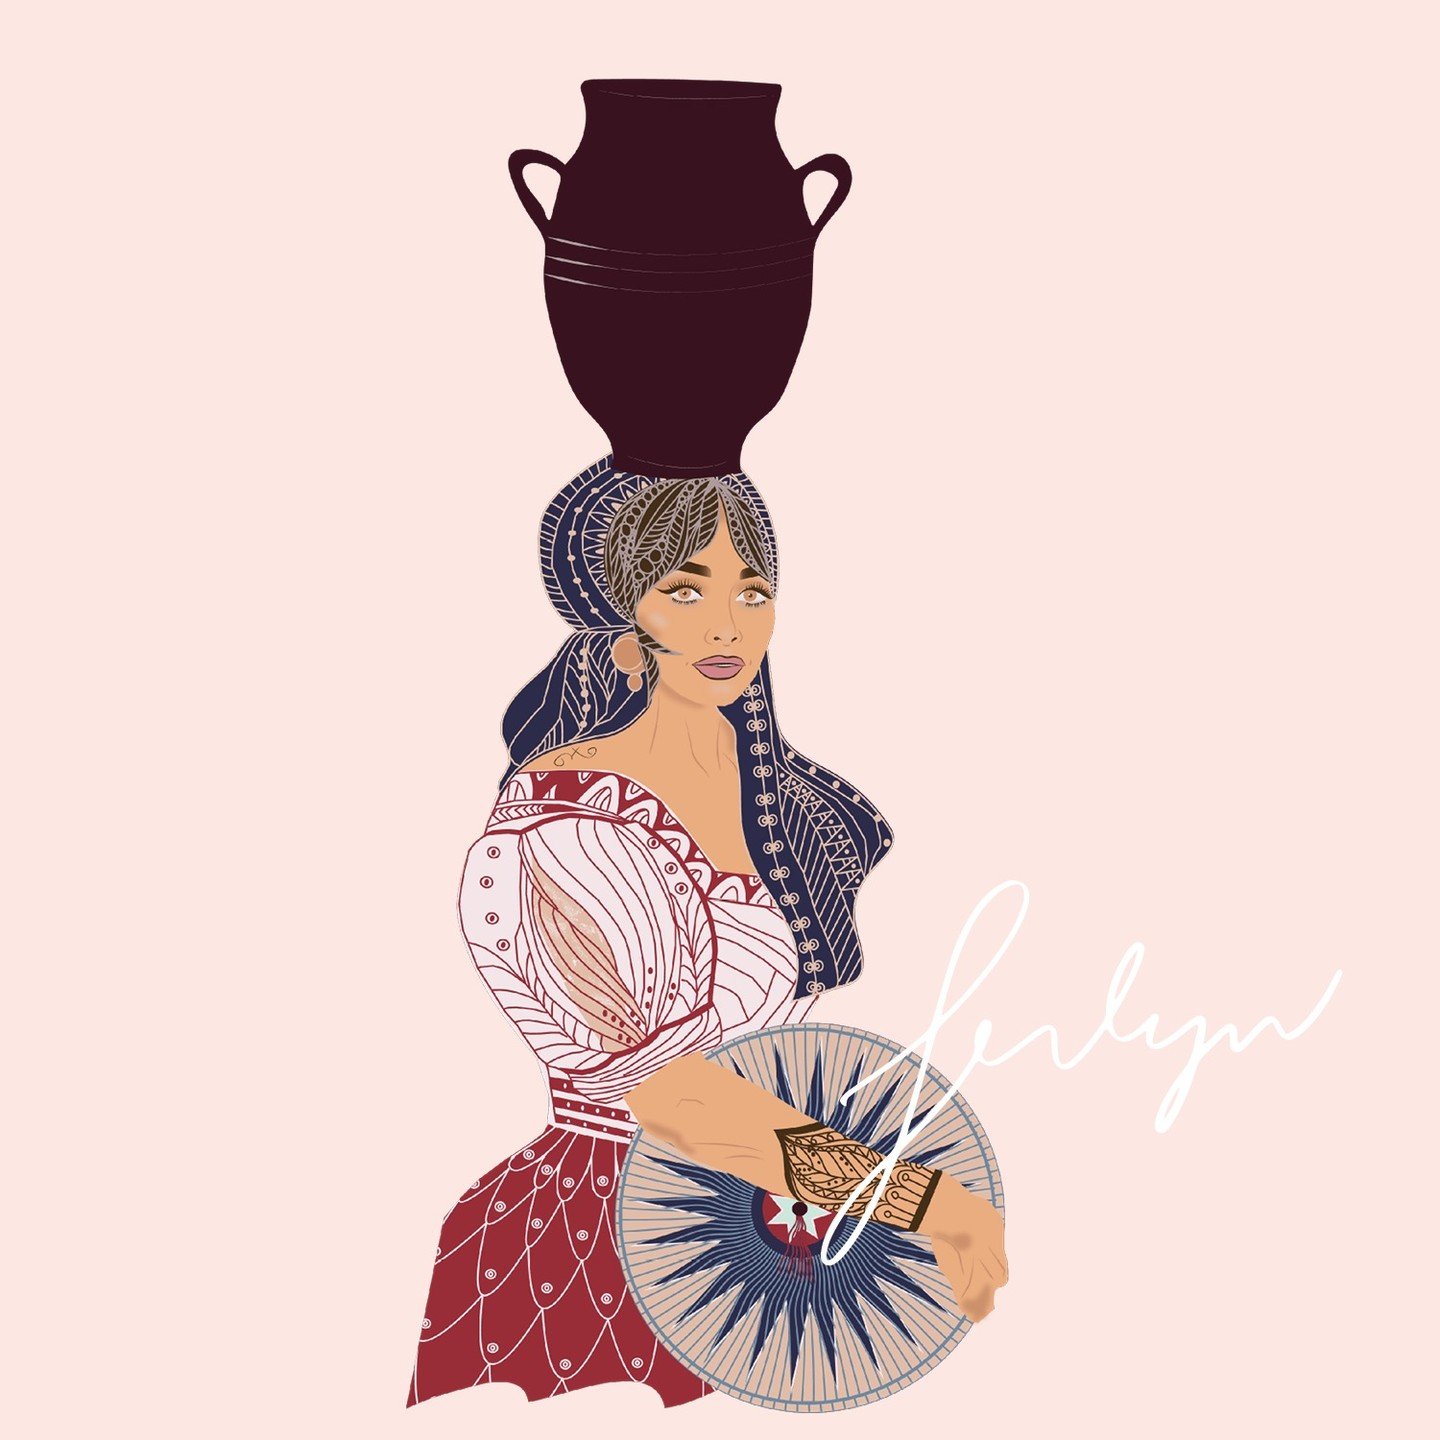 The image of a typical Filipina gracefully carrying a jug of water on her head, adorned with a traditional salakot, is nothing short of a masterpiece. It captures the essence of courage, pure simplicity, and beauty, while at the same time evoking a n